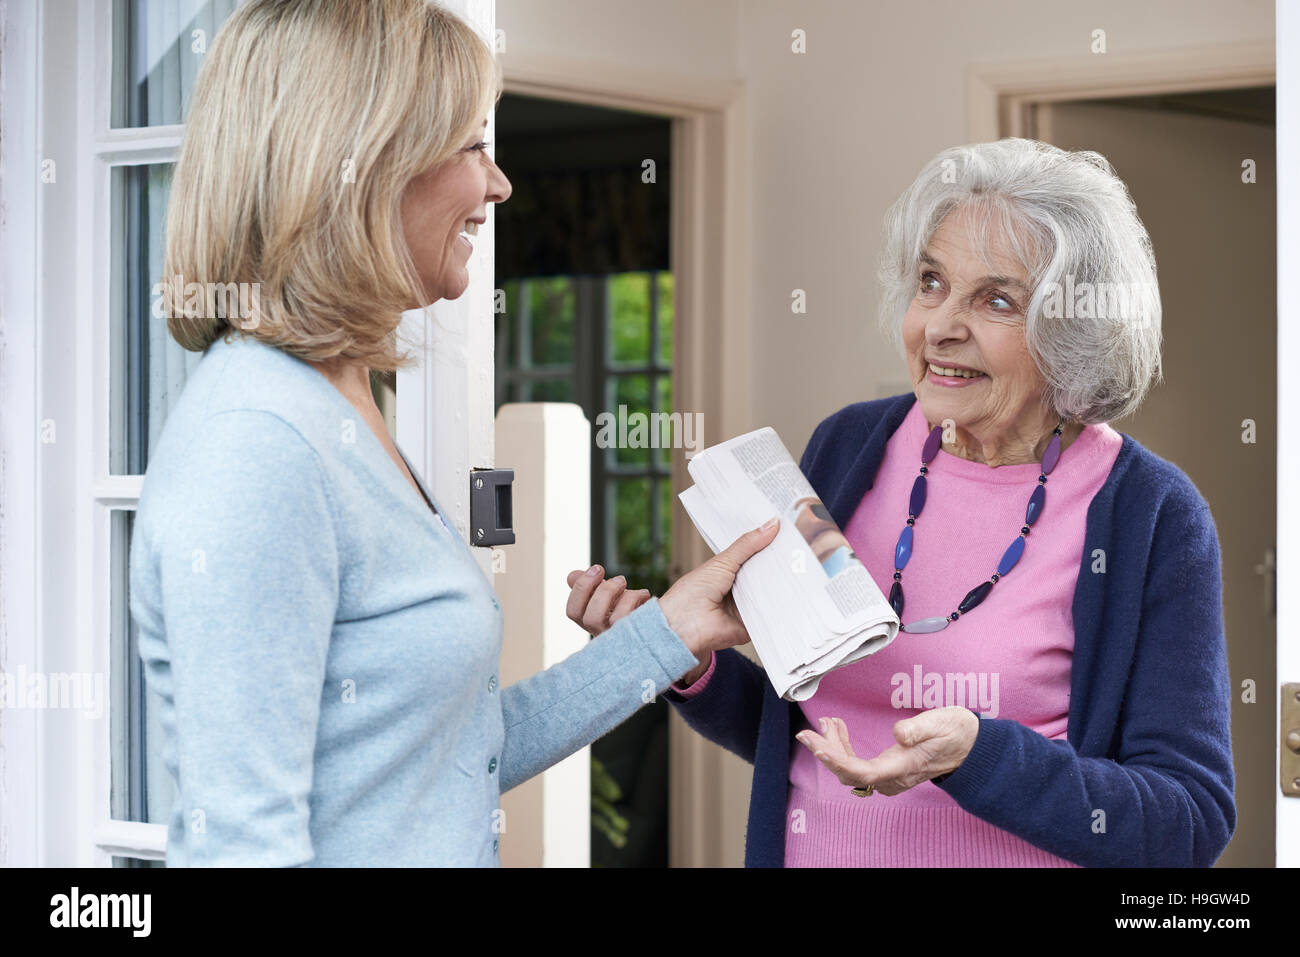 Woman Delivering Newspaper To Elderly Neighbour Stock Photo